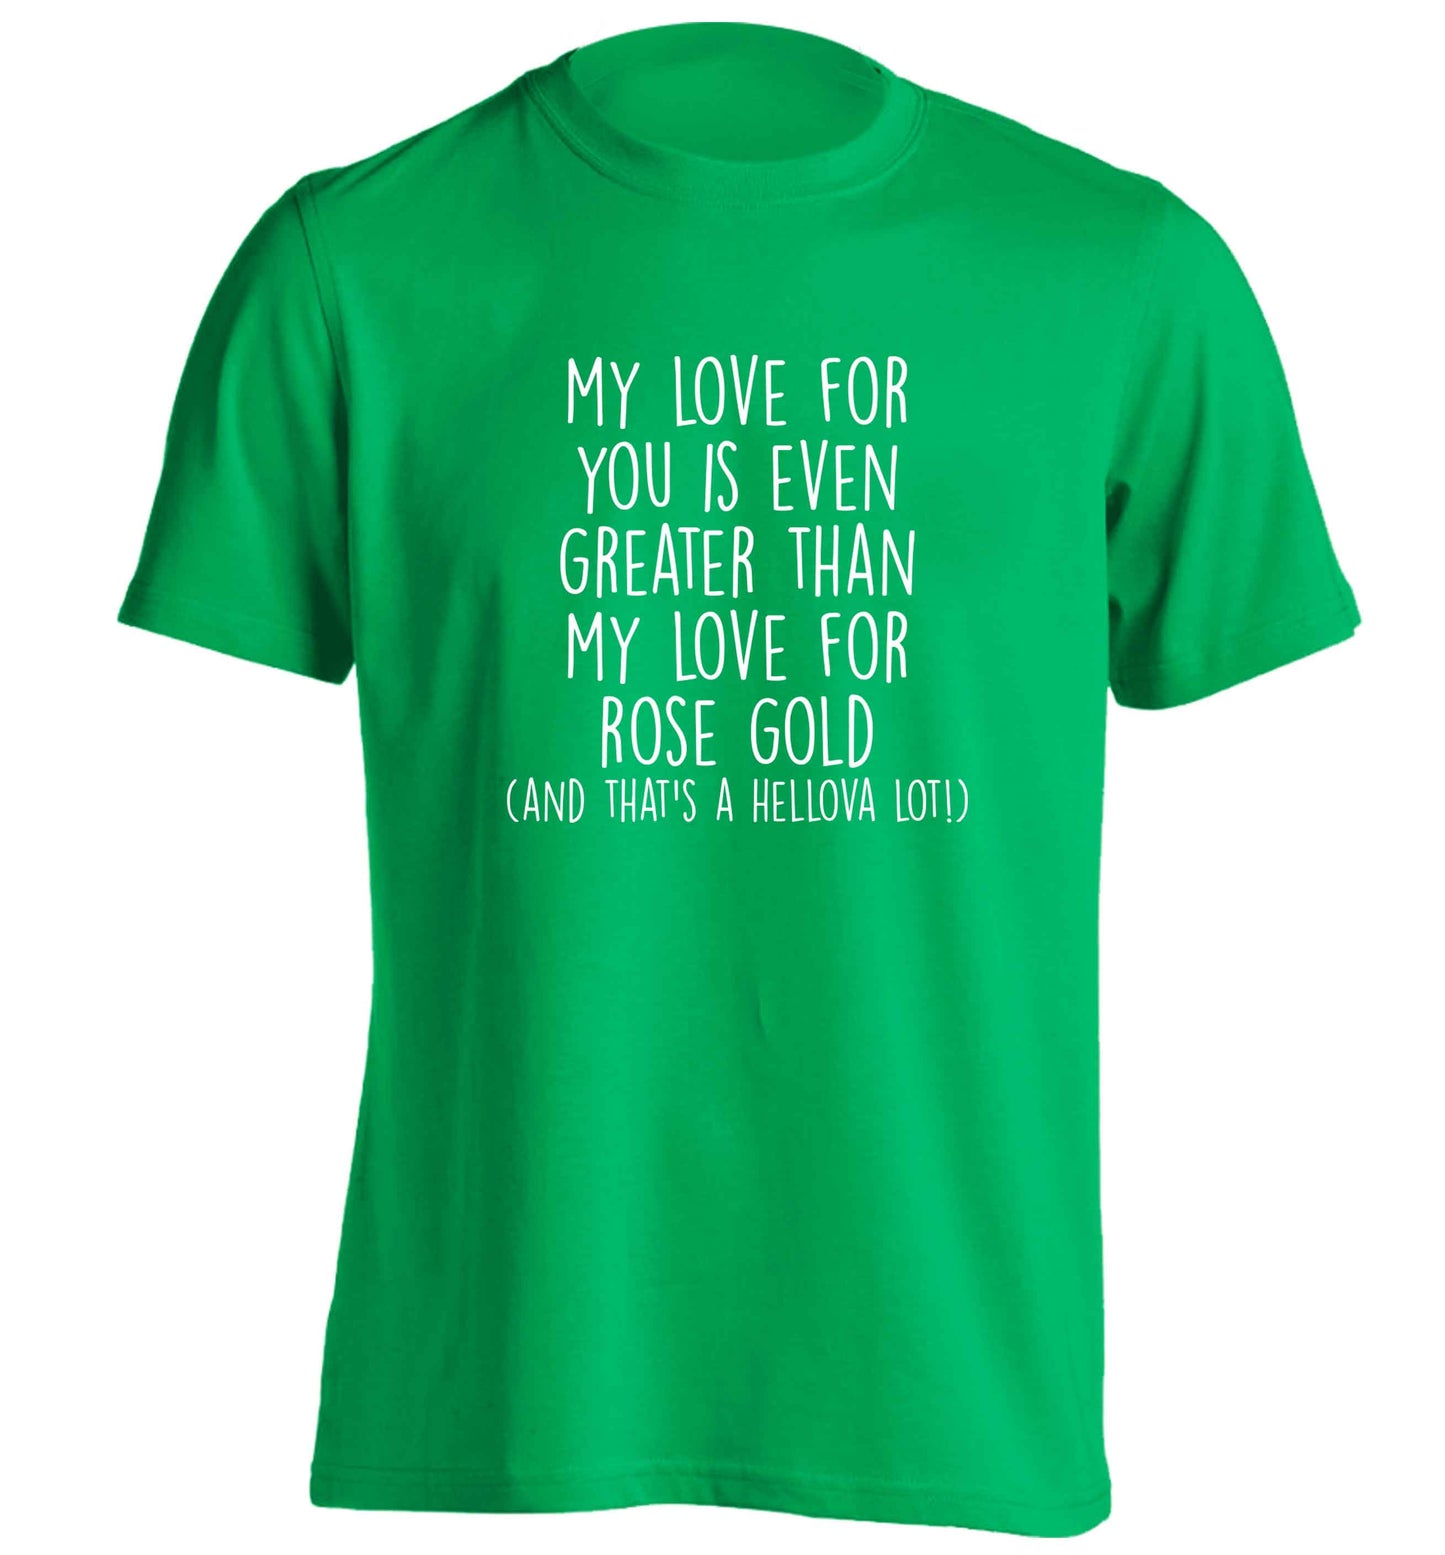 My love for you is even greater than my love for rose gold (and that's a hellova lot) adults unisex green Tshirt 2XL